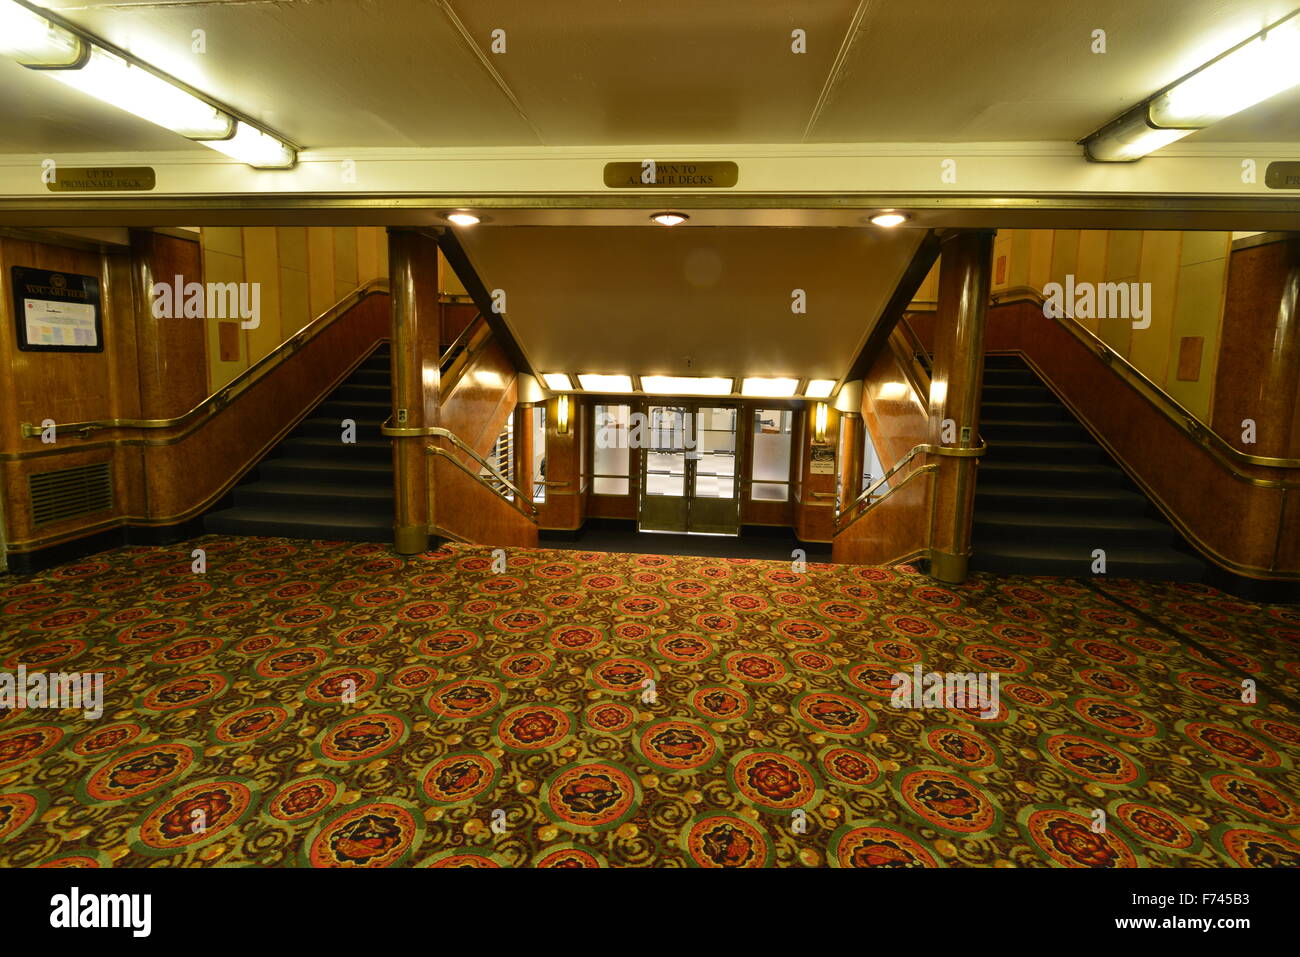 The interior of the Liner the RMS Queen Mary Stock Photo - Alamy